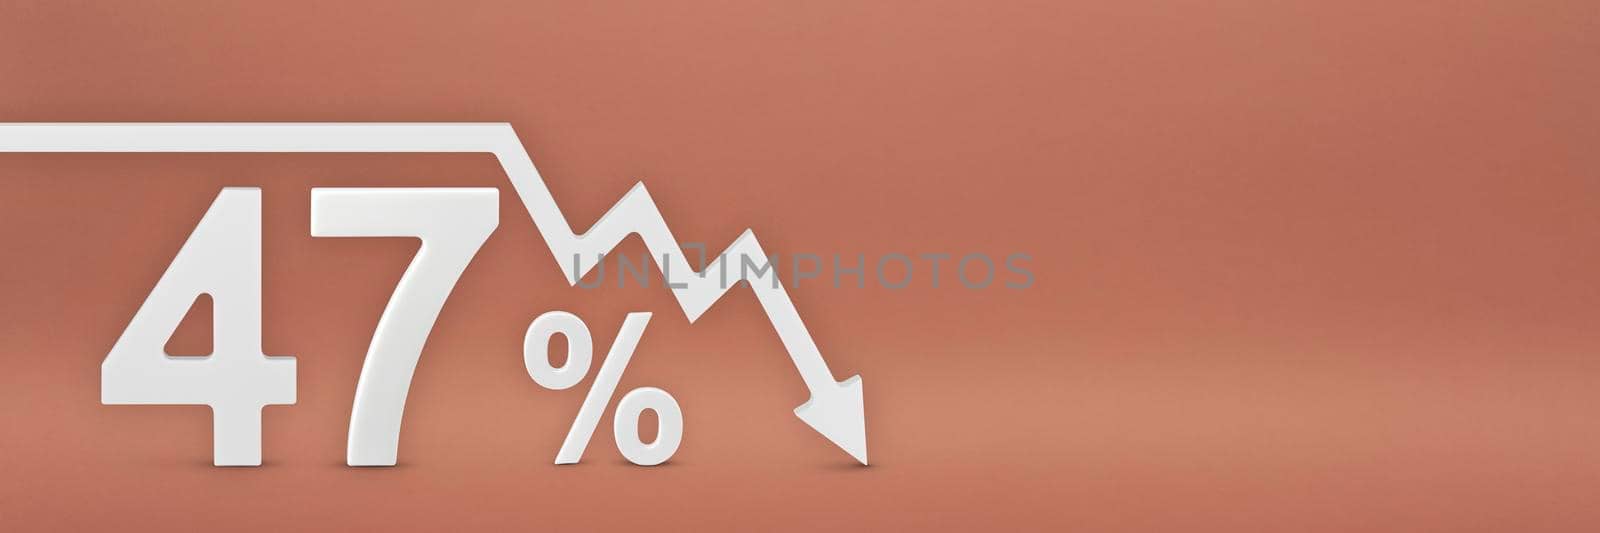 forty-seven percent, the arrow on the graph is pointing down. Stock market crash, bear market, inflation.Economic collapse, collapse of stocks.3d banner,47 percent discount sign on a red background